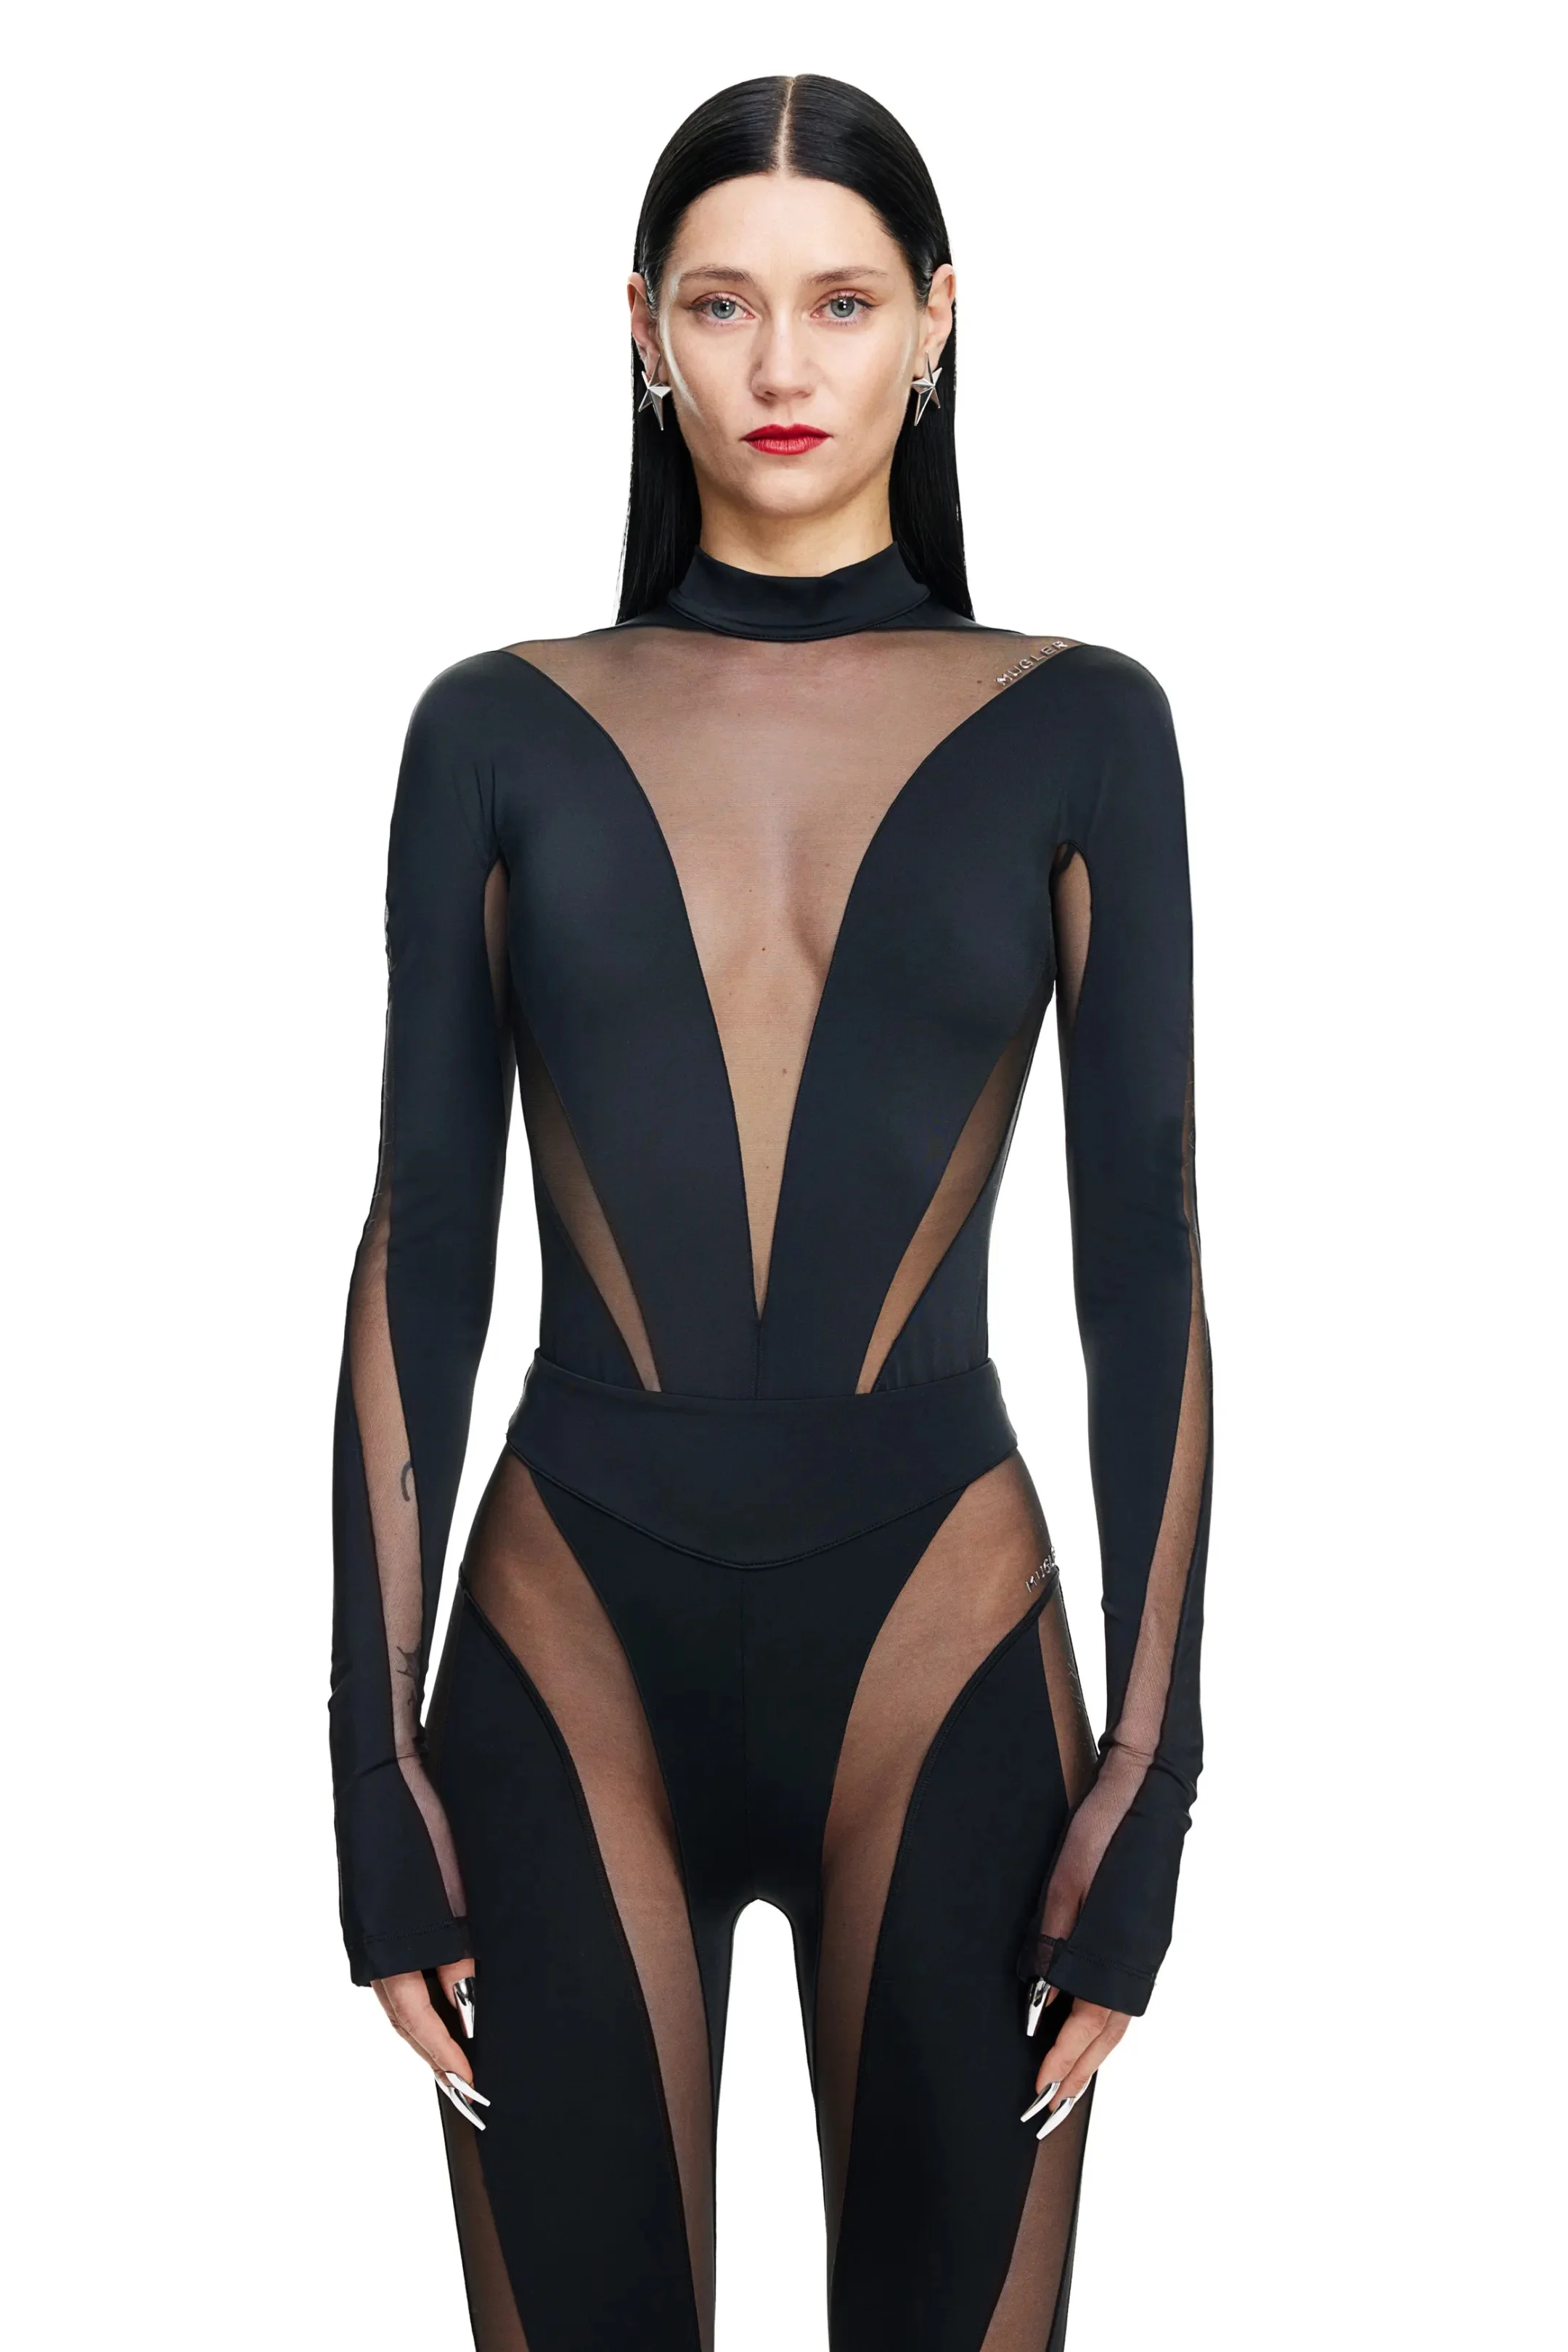 Mugler Panelled Stretch-jersey And Tulle Bodysuit, Black, 10